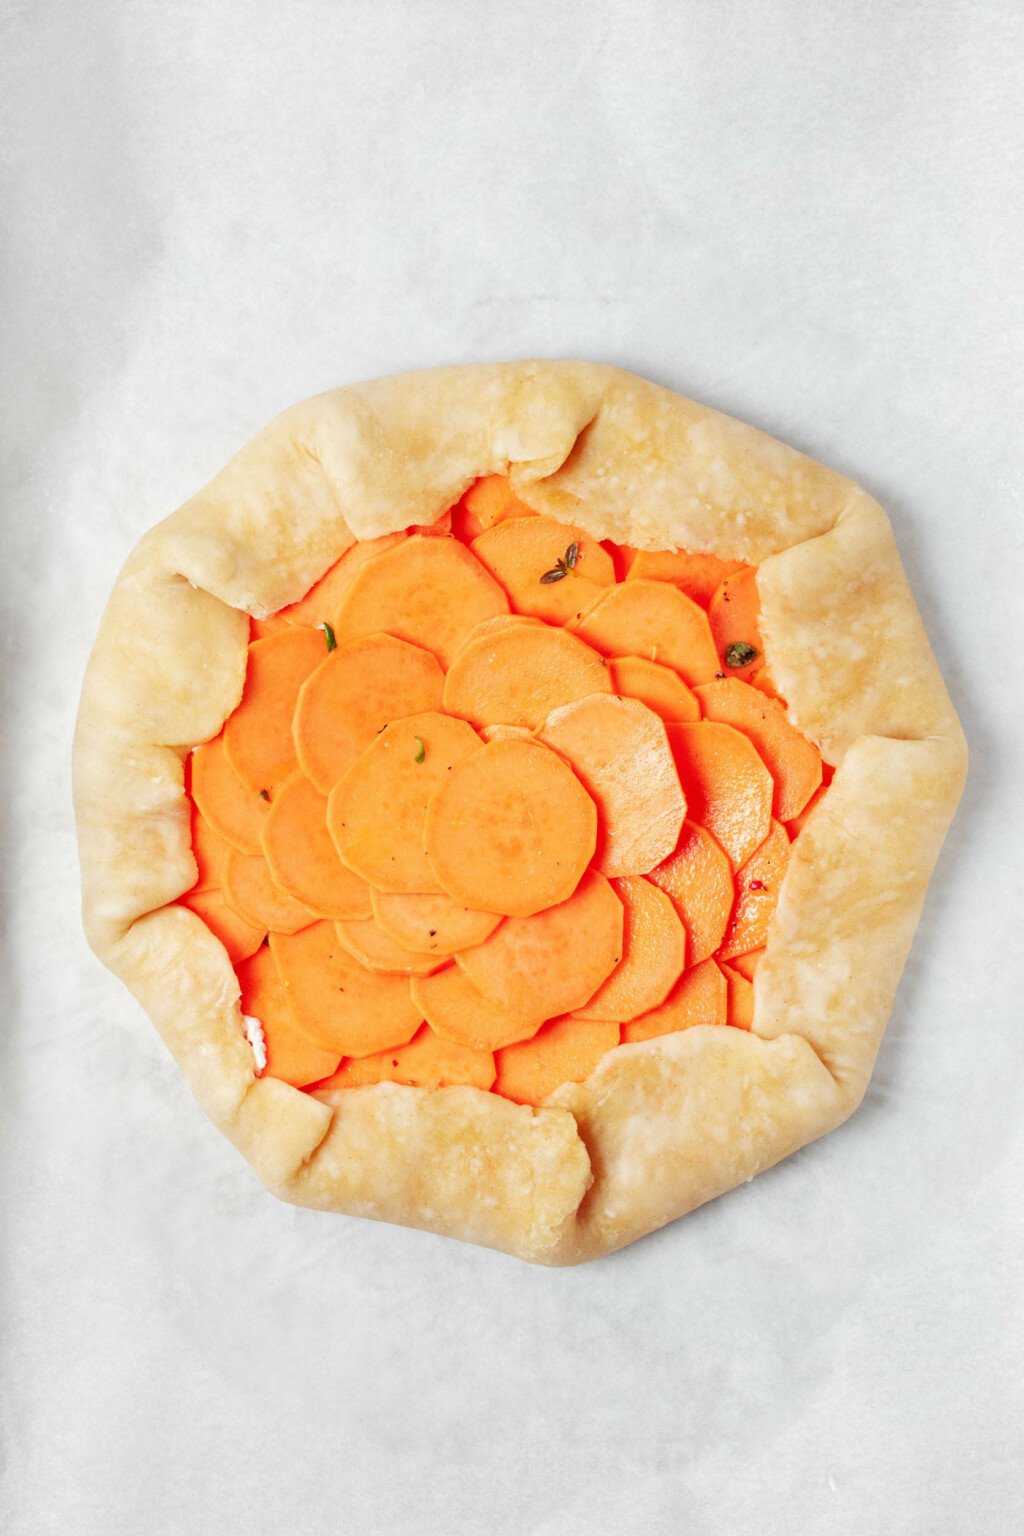 A vegan sweet potato galette is being prepared on a sheet of white parchment paper.